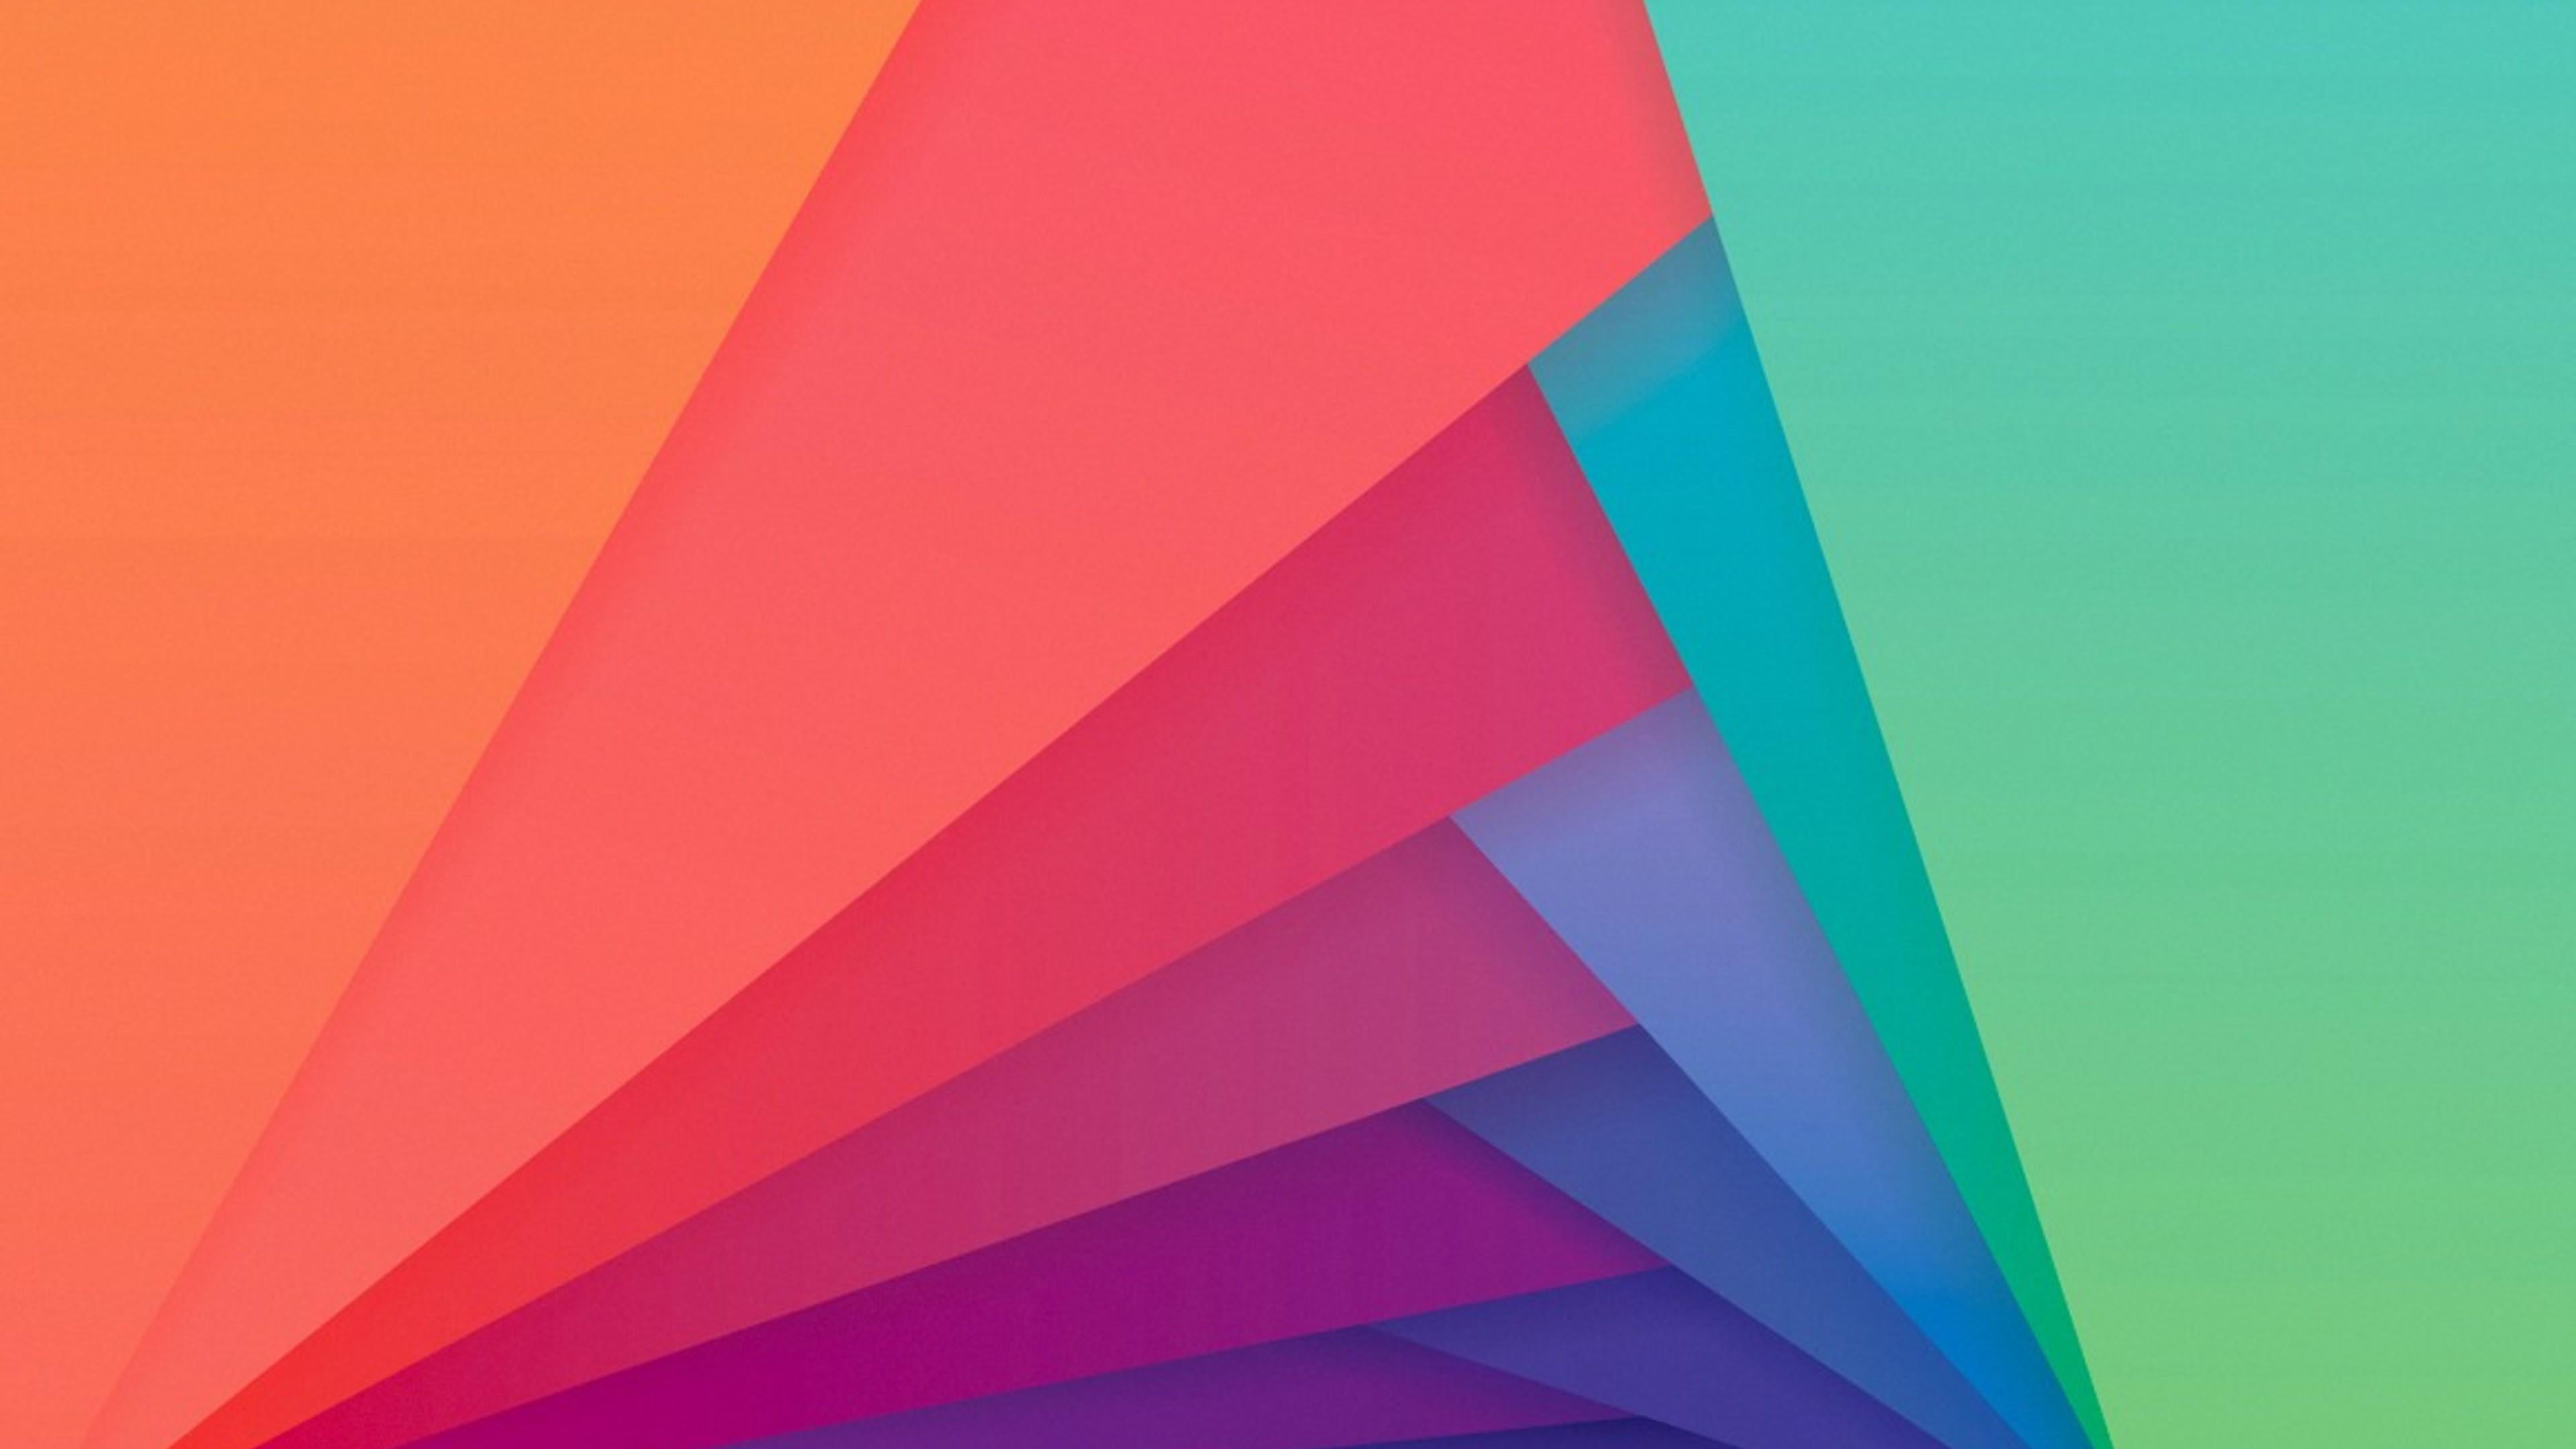 material design, colors, multi colored, backgrounds, full frame